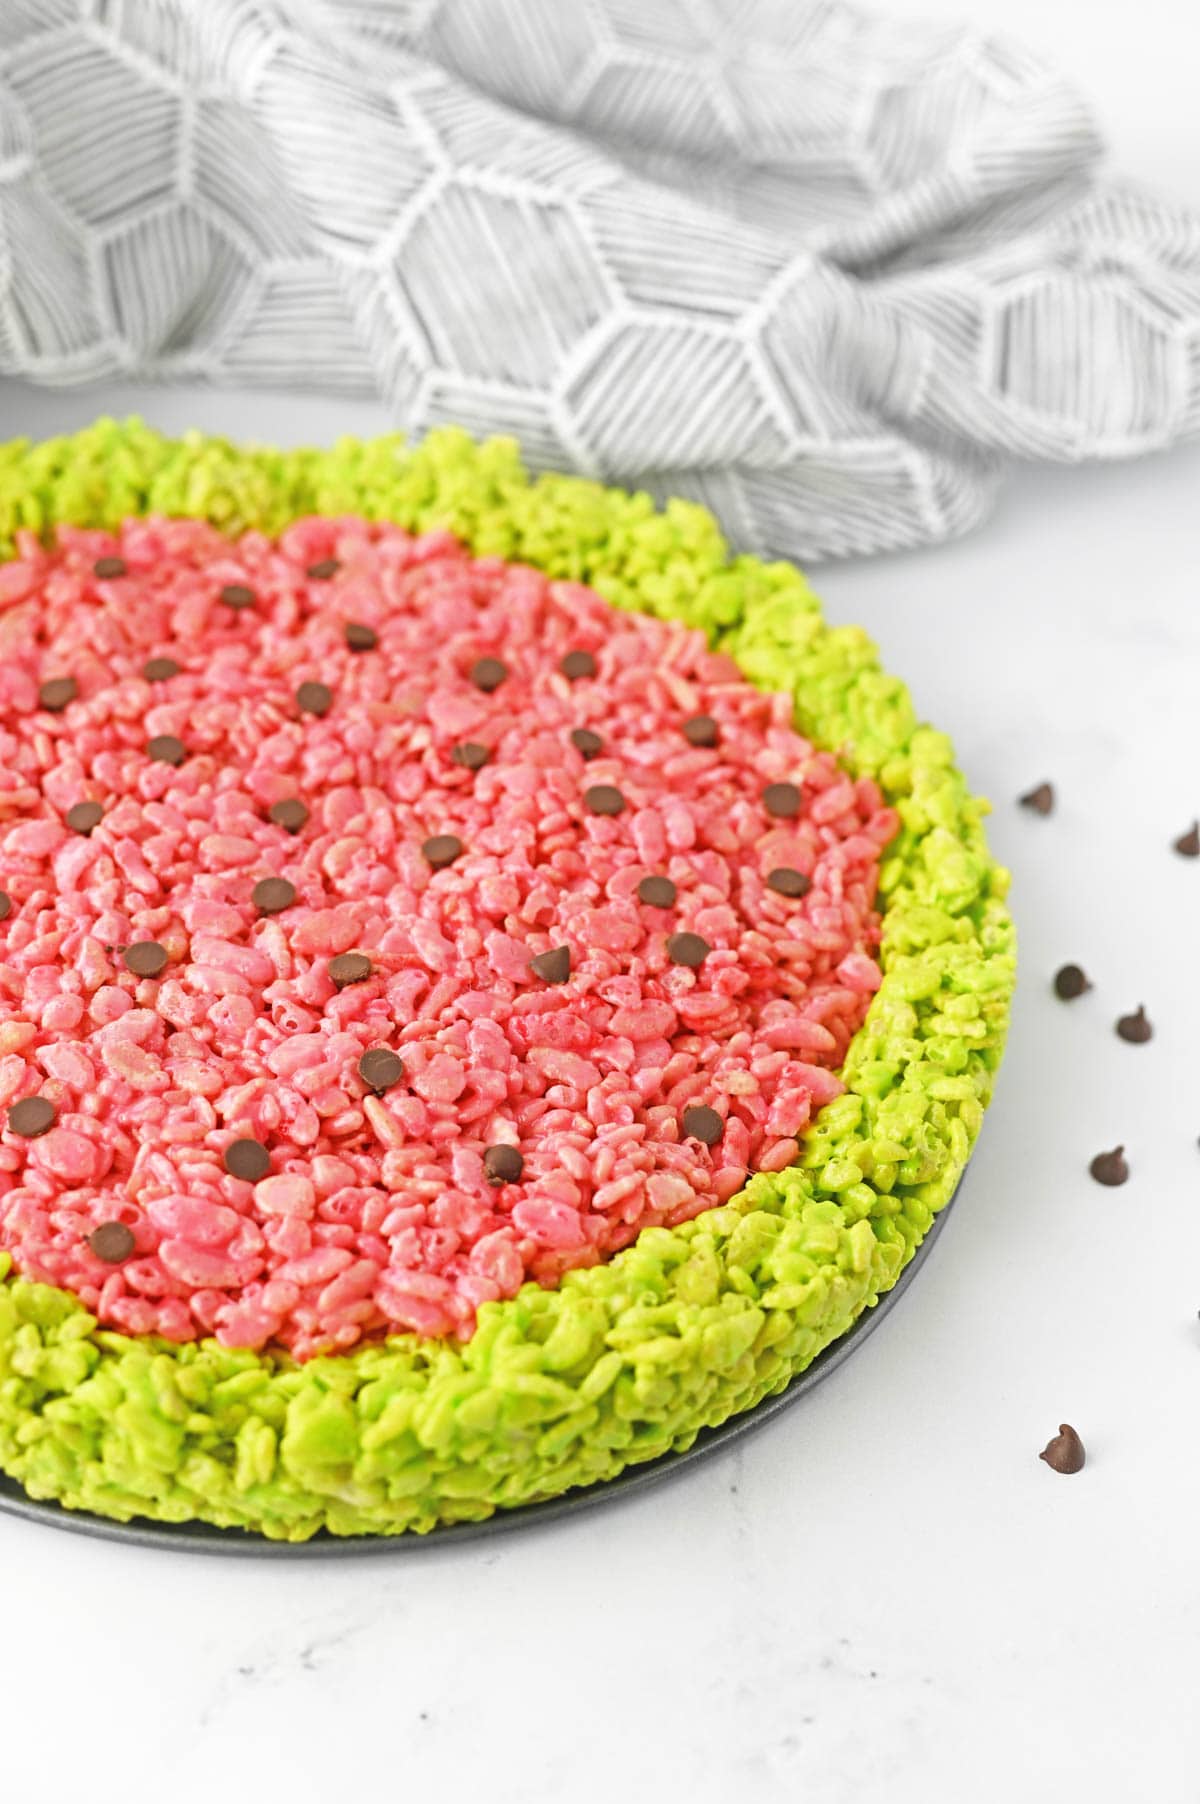 Watermelon rice krispie treat with gray and white patterned napkin